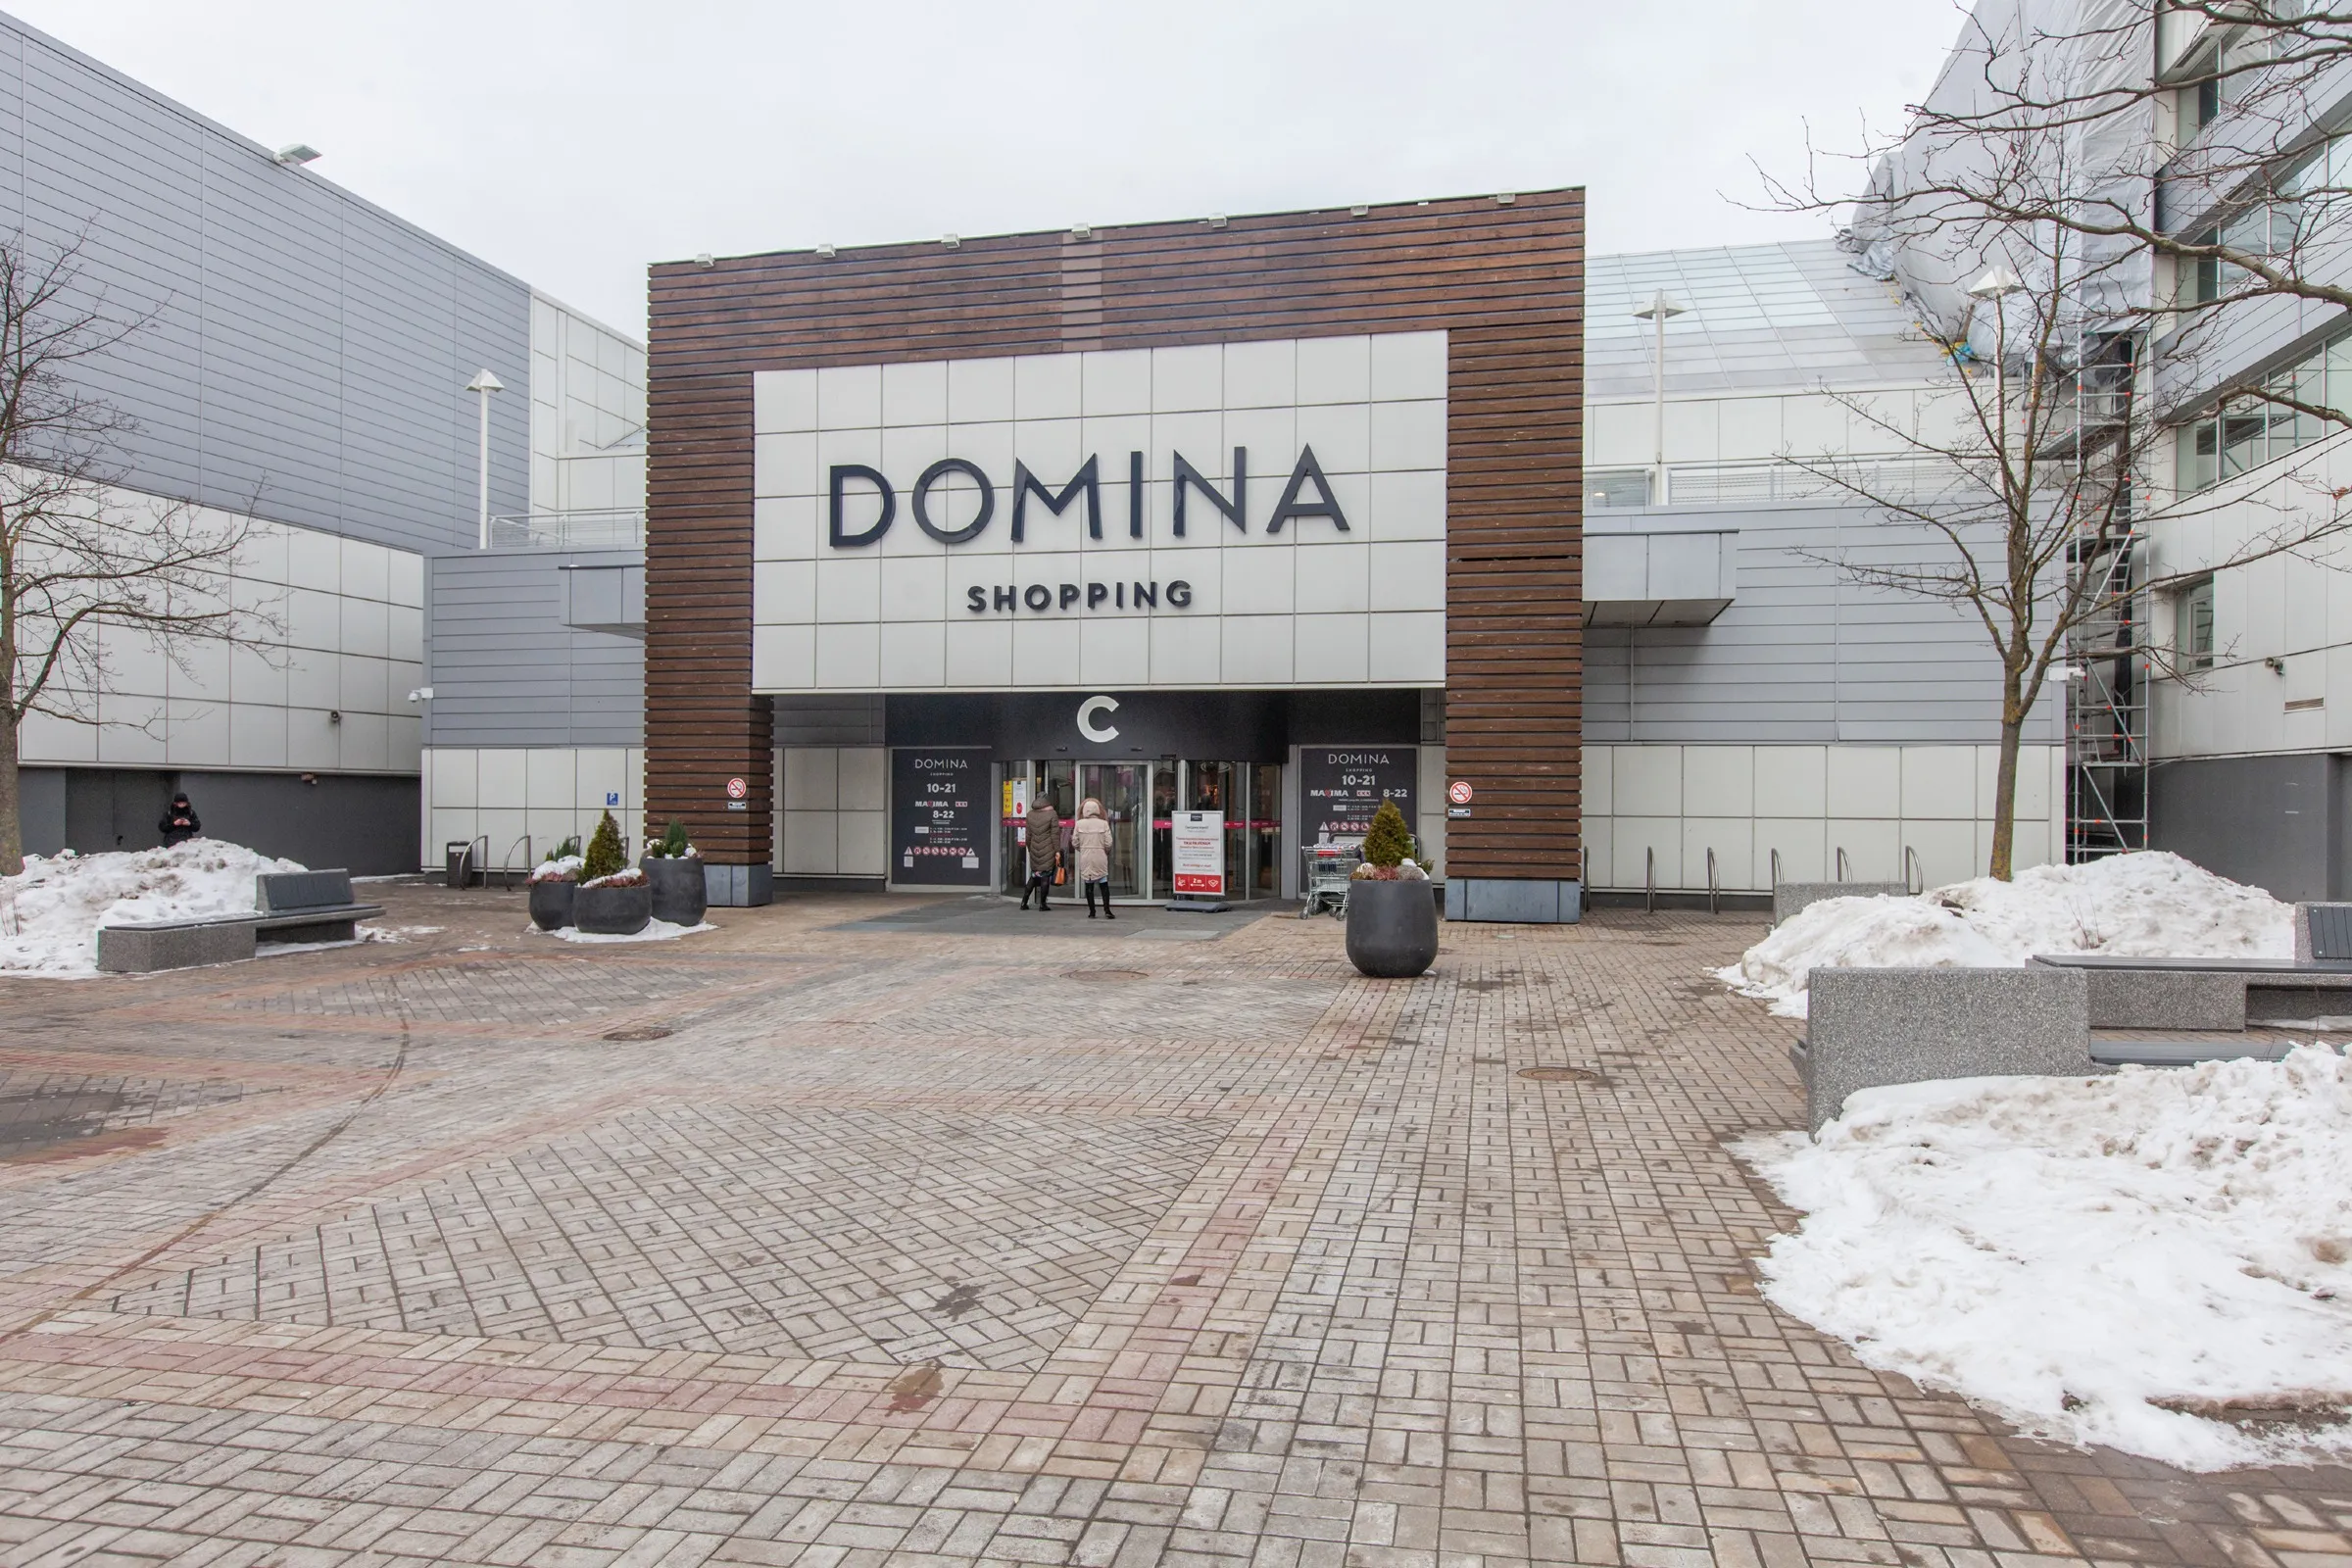 Domina Shopping in Latvia, europe | Handbags,Shoes,Accessories,Clothes,Handicrafts,Cosmetics,Travel Bags,Jewelry,Swimwear - Country Helper